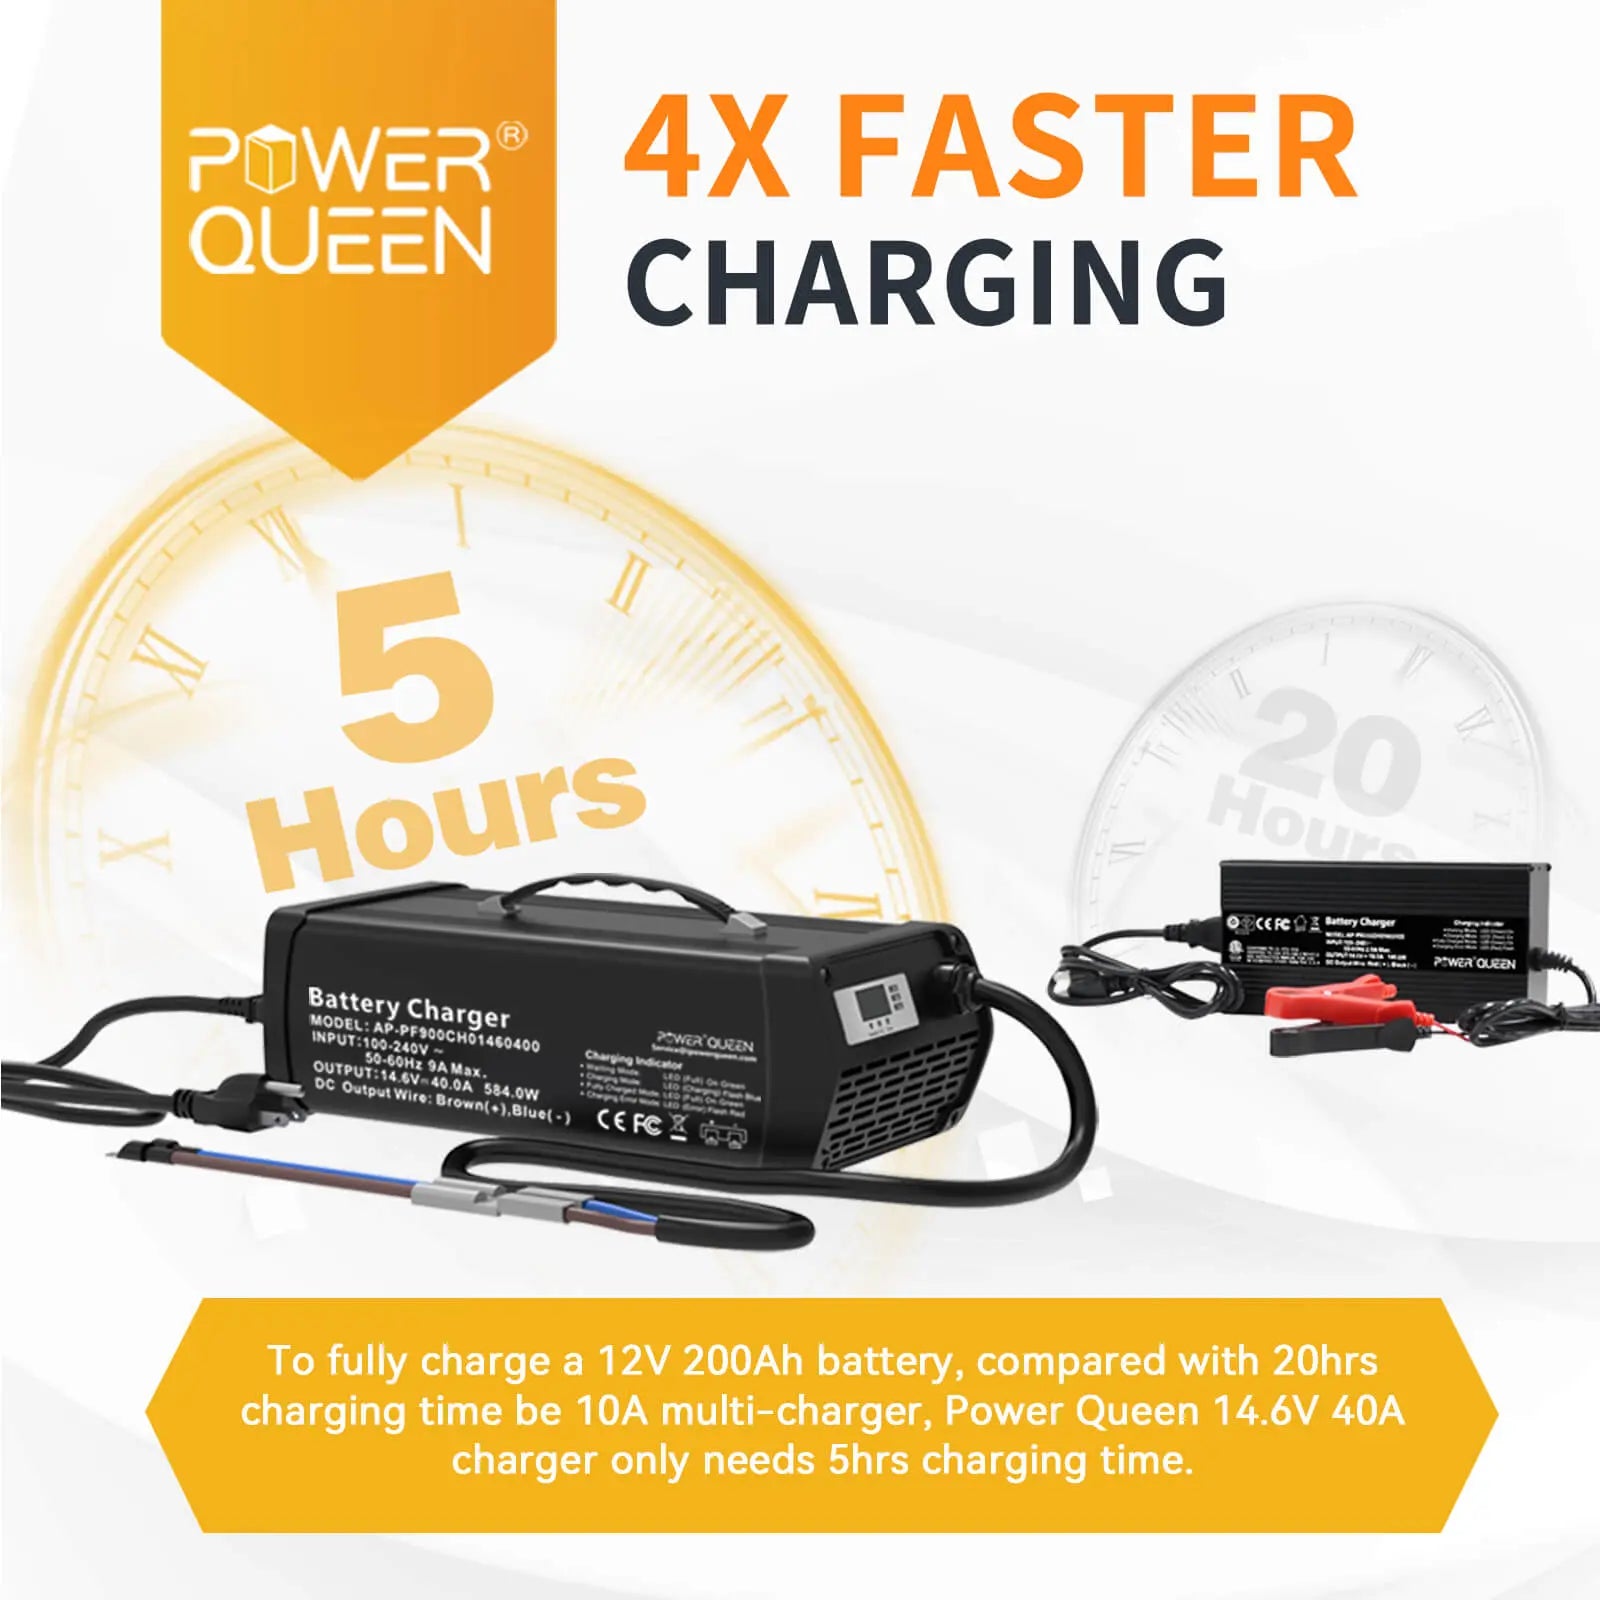 Power Queen 14.6V 40A LiFePO4 Battery Charger Power Queen